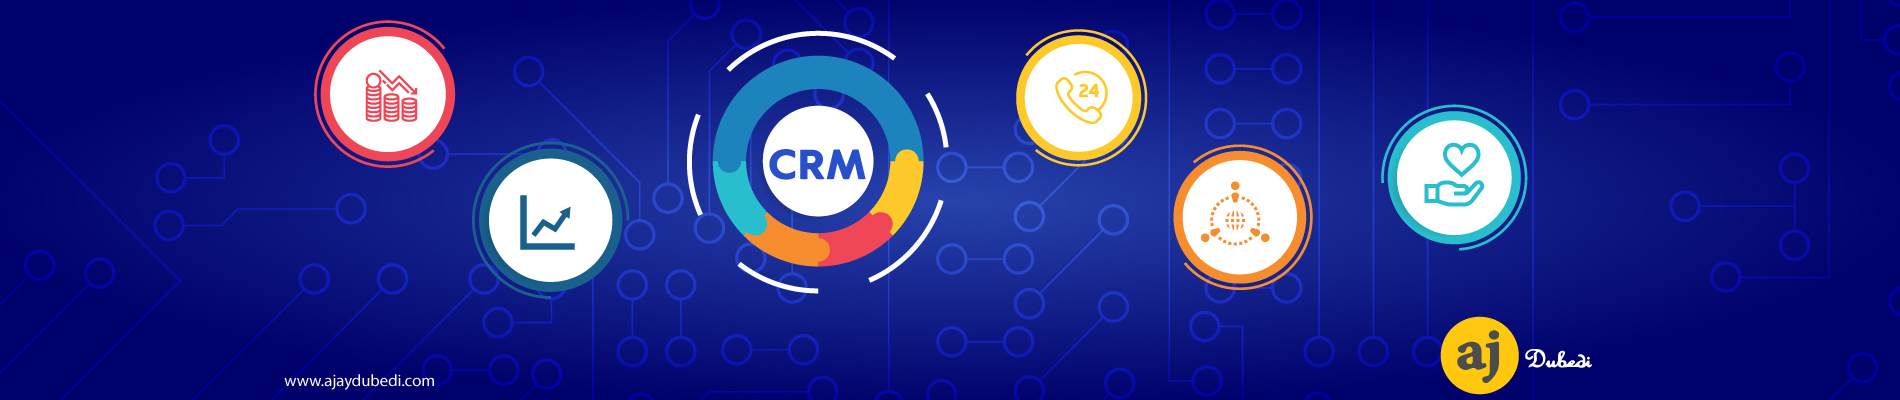 5 Ways CRM helps you grow your business